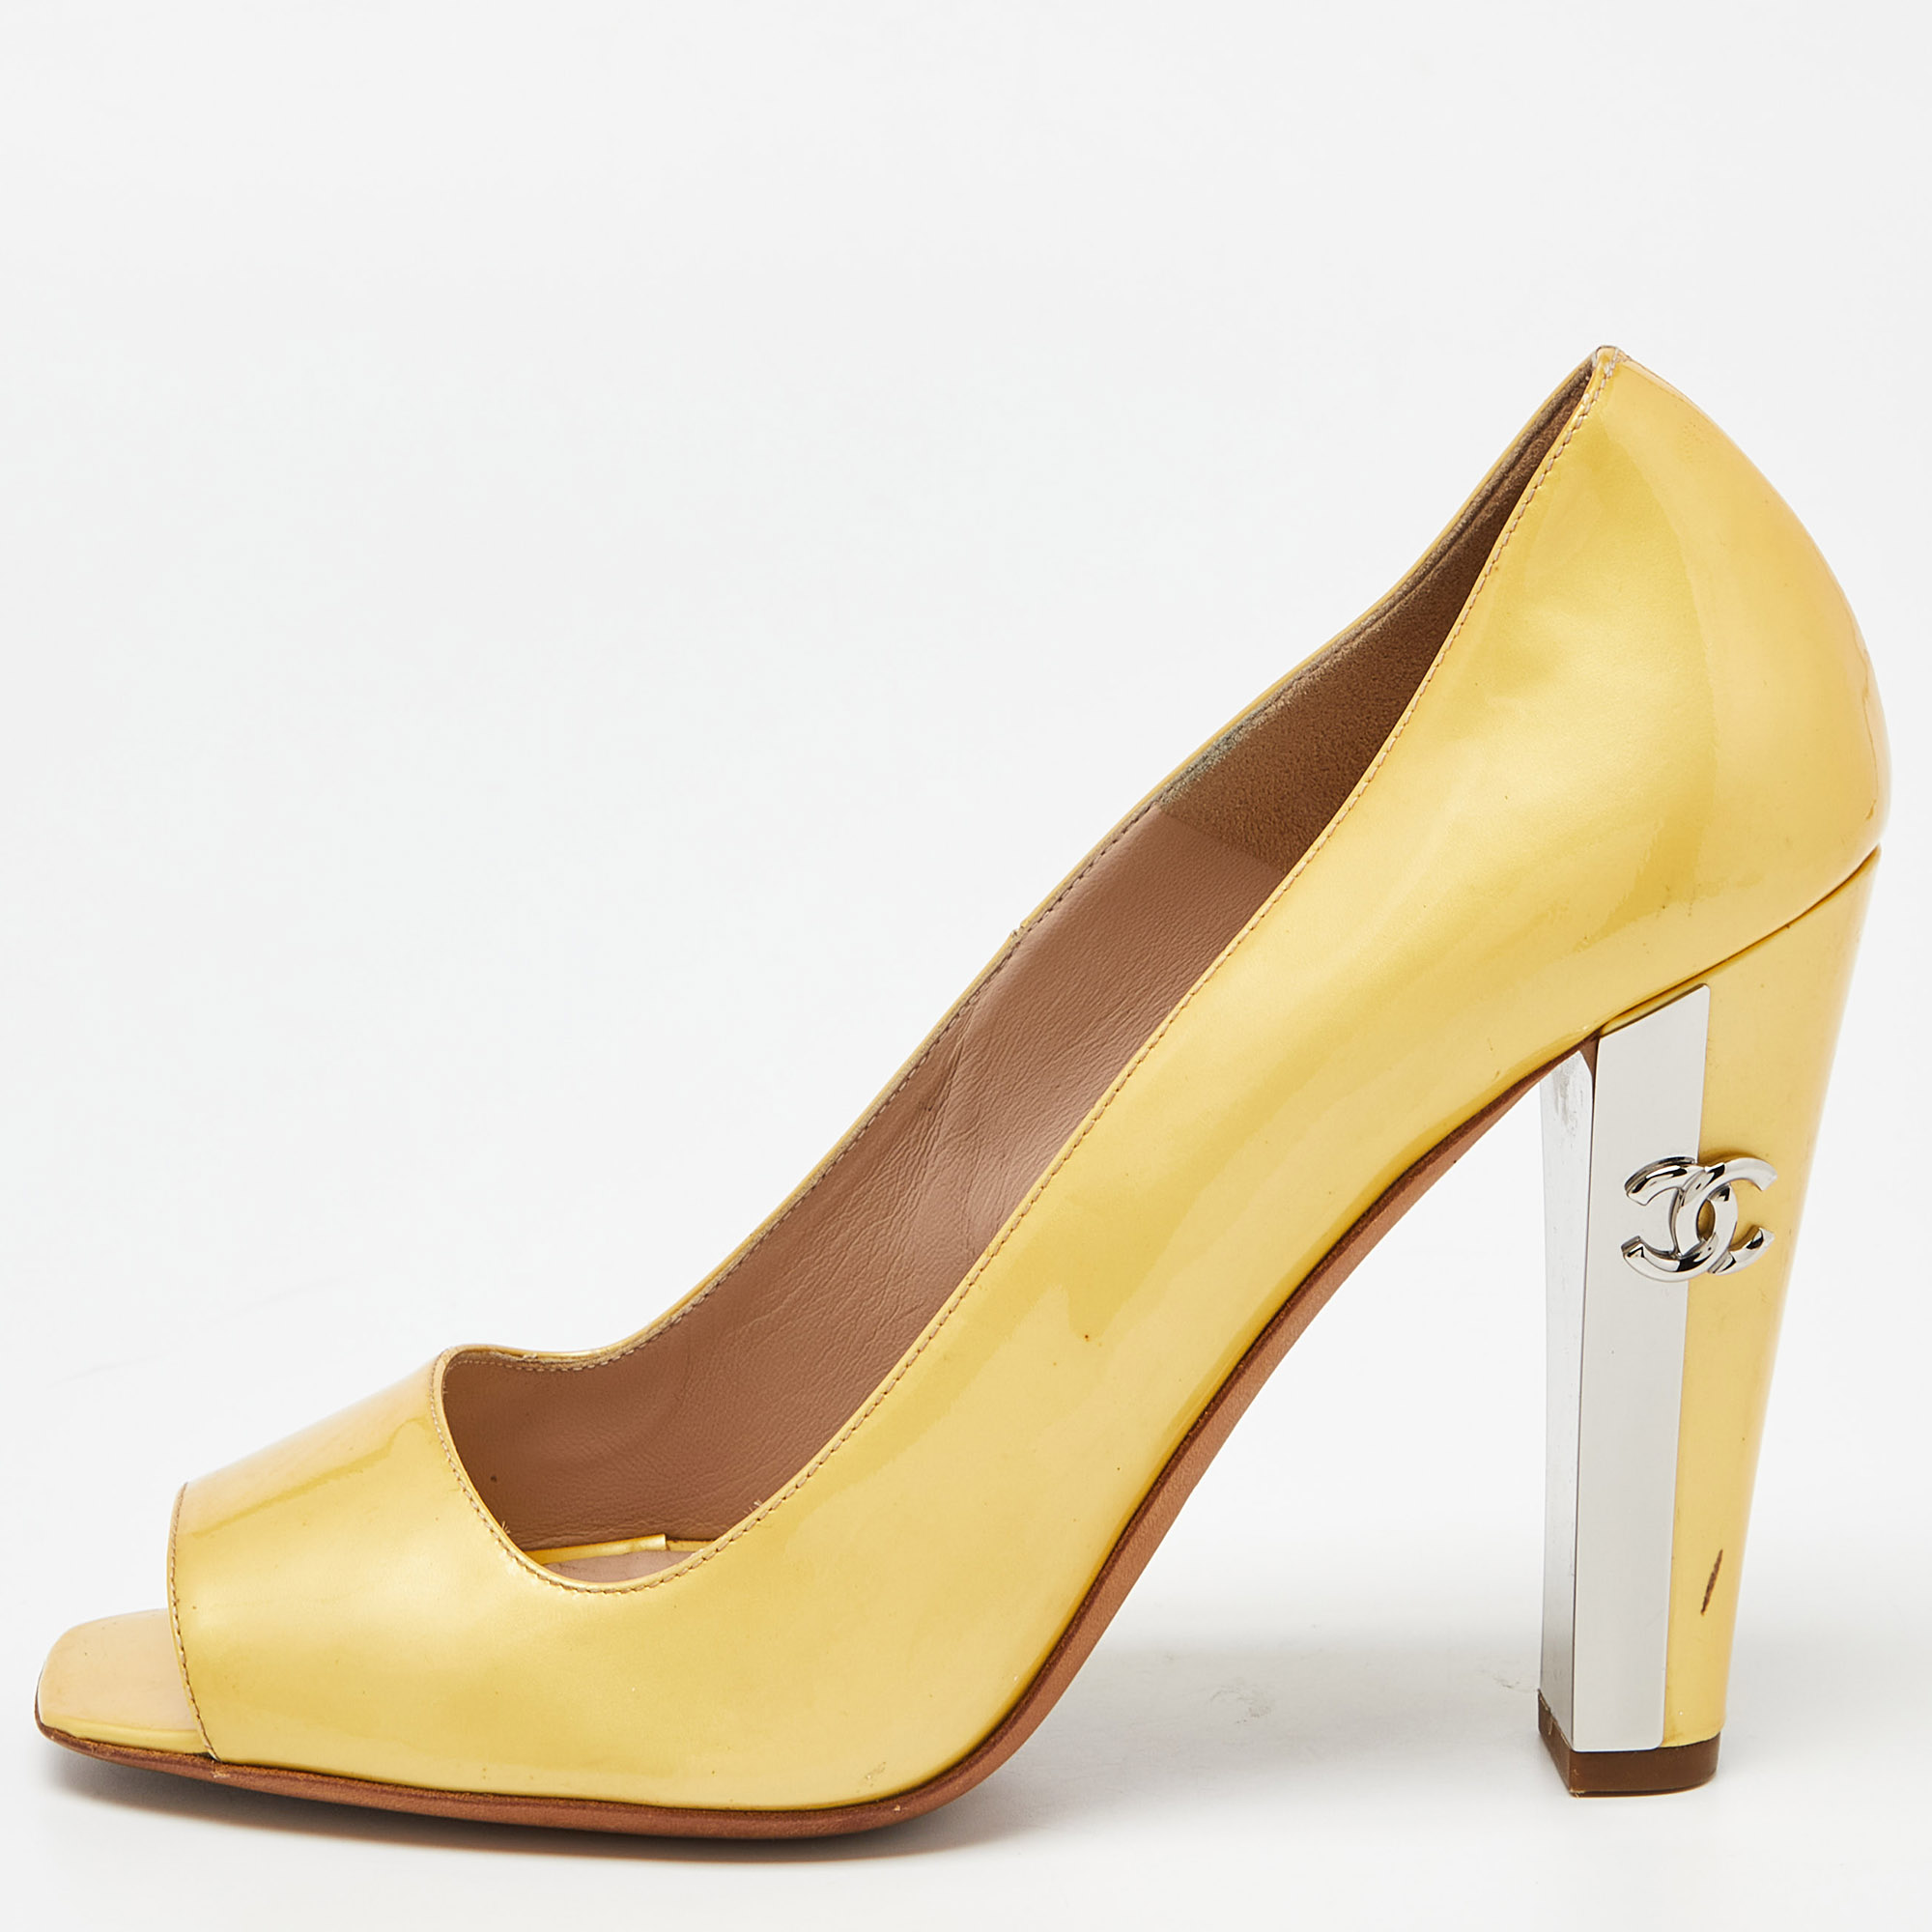 Chanel yellow patent leather cc open toe pumps size 38